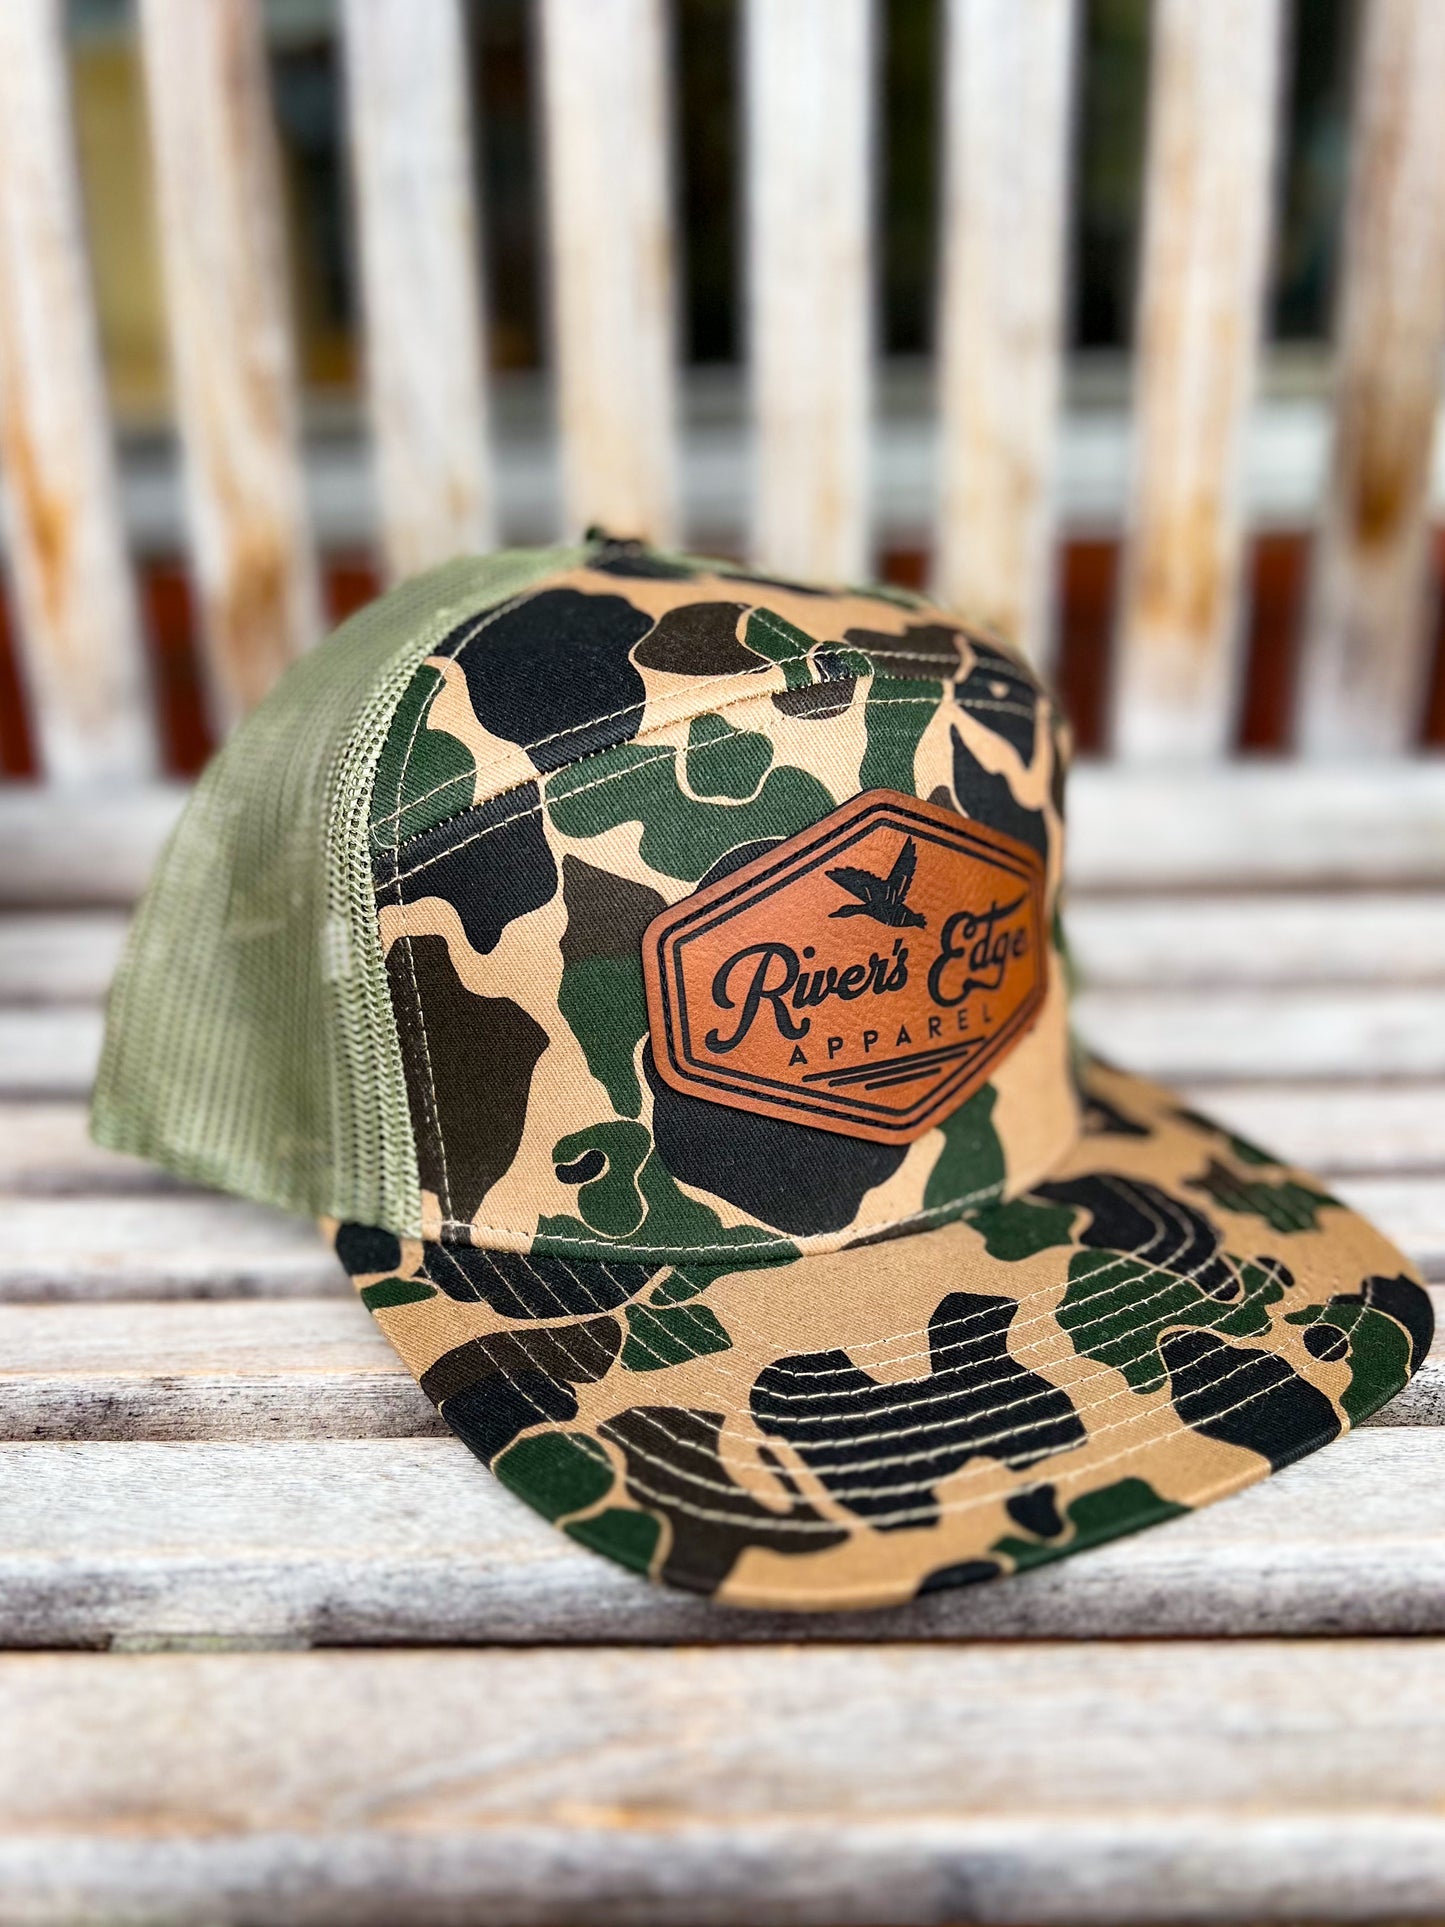 7 Panel River’s Edge Apparel Trucker Hat with Leather Patch - Old School Camo